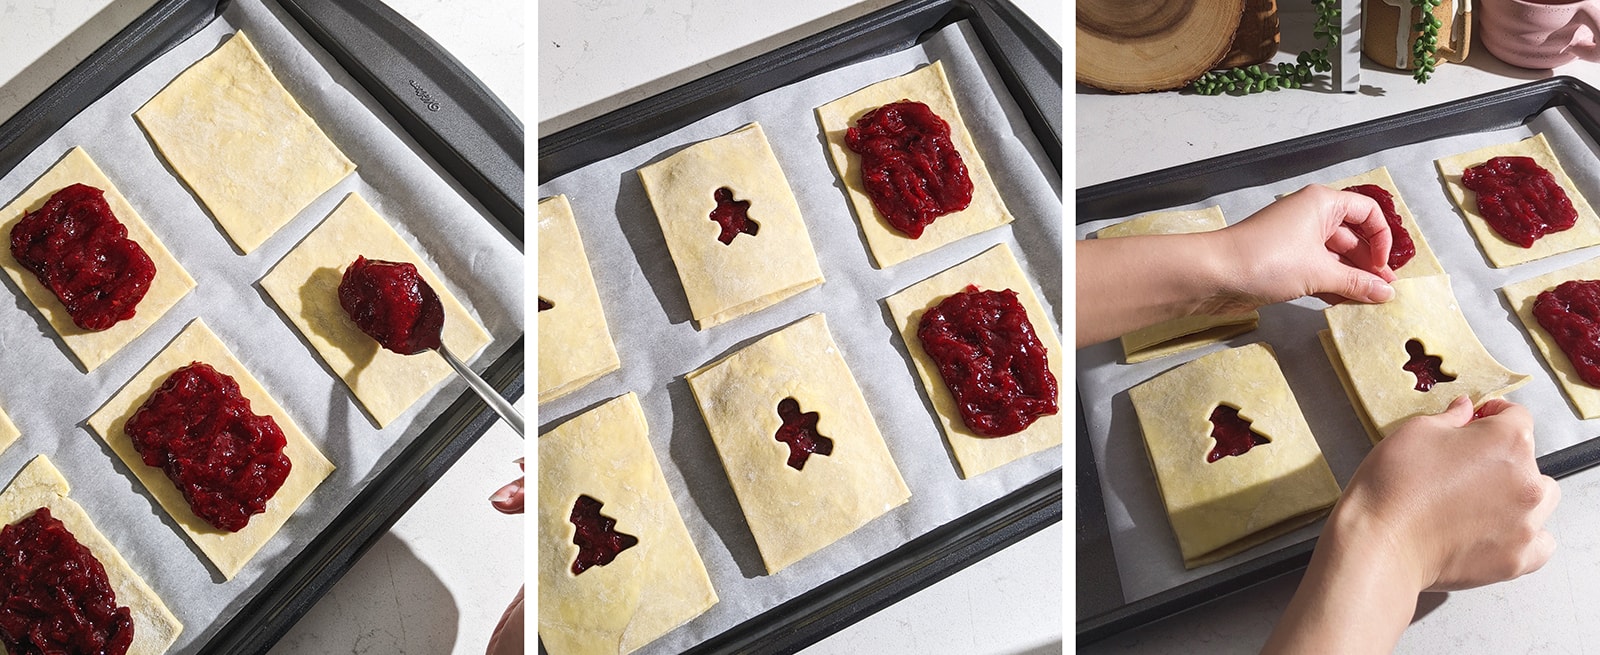 Placing spoonfuls of cranberry sauce on pie dough and placing a second layer of dough on top.